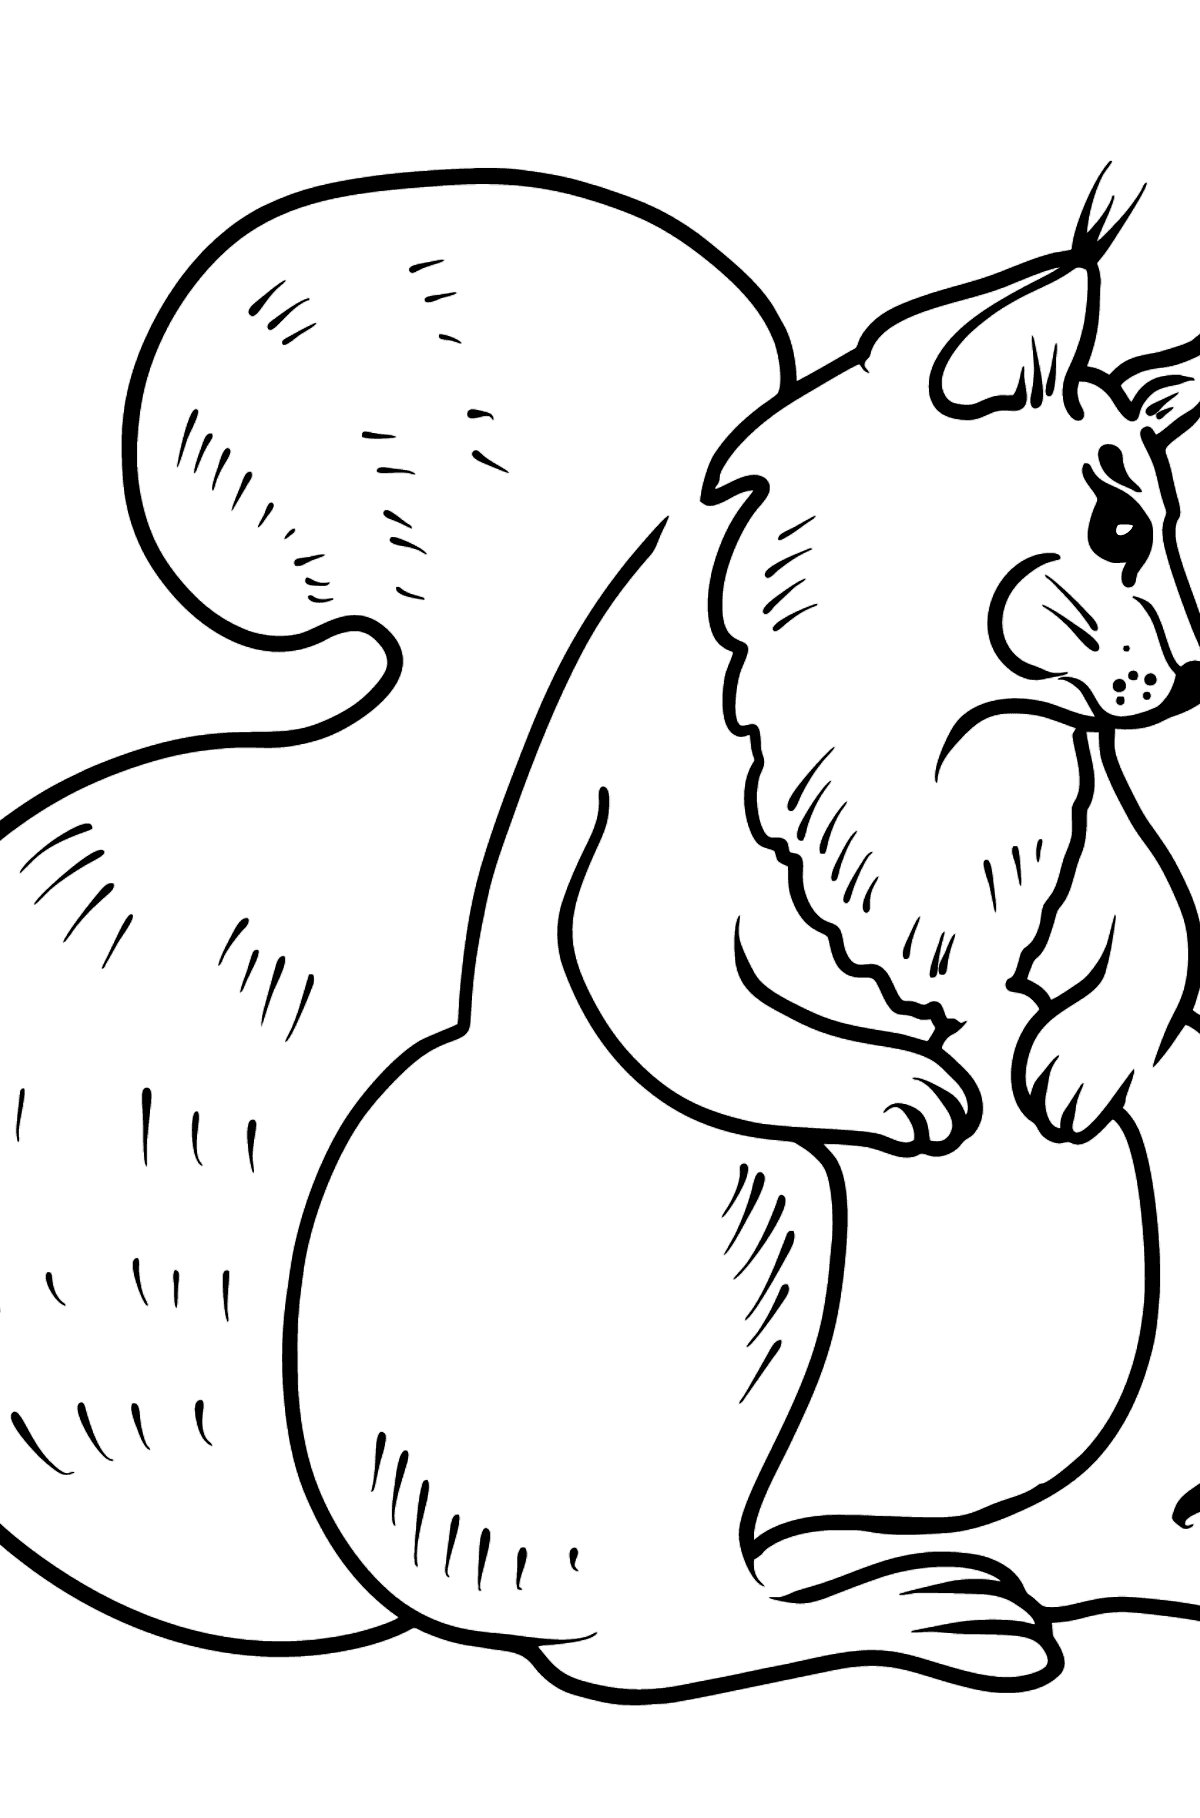 Squirrel coloring page - Coloring Pages for Kids